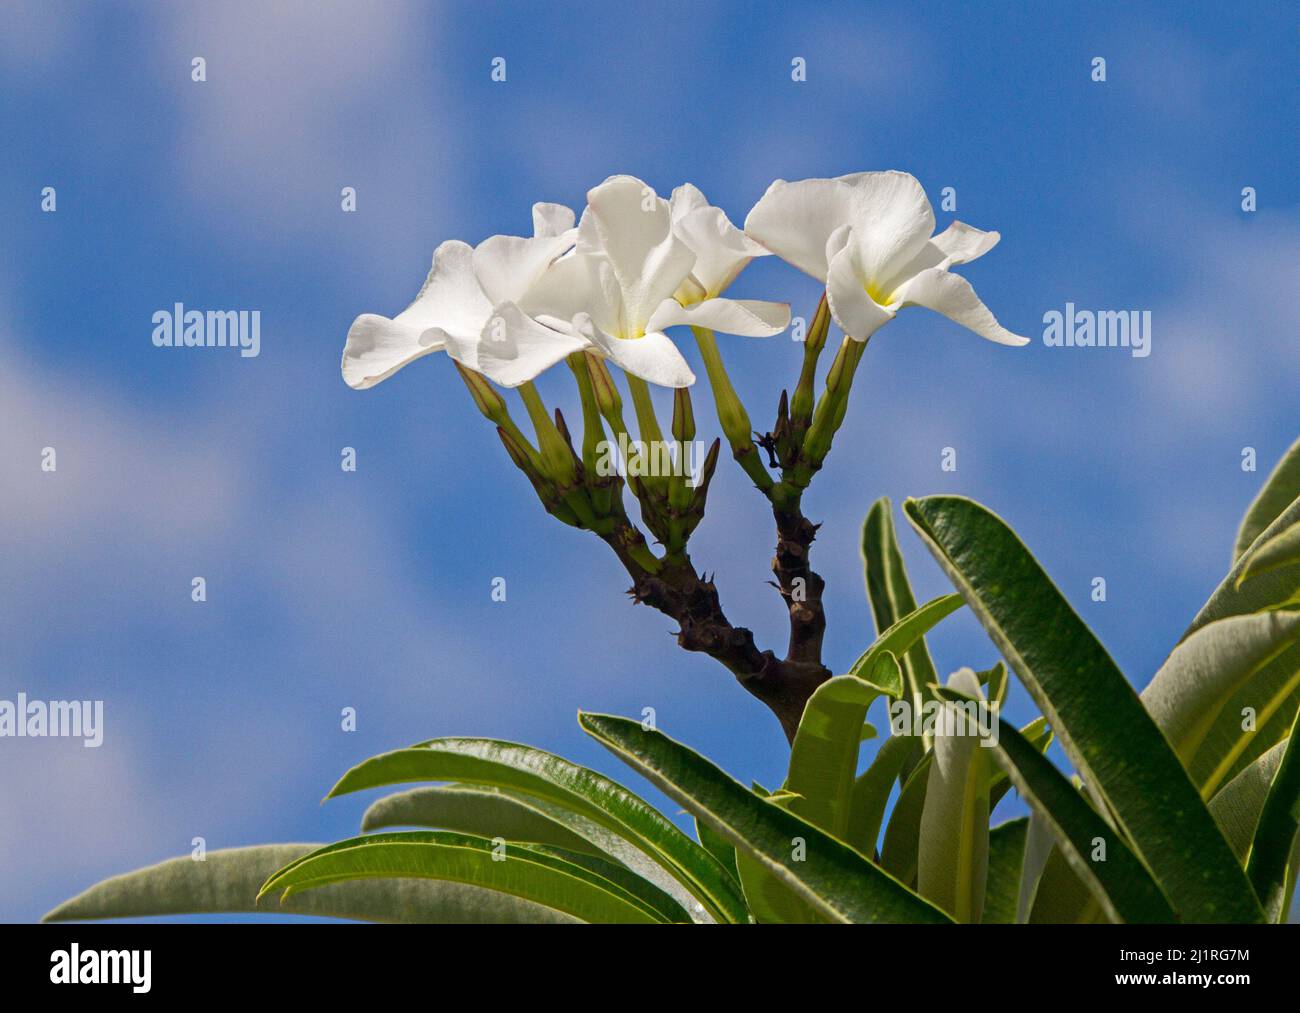 Cluster of large white flowers of Pachypodium lamerei, Madagascar palm, a drought tolerant succulent plant, against background of blue sky Stock Photo